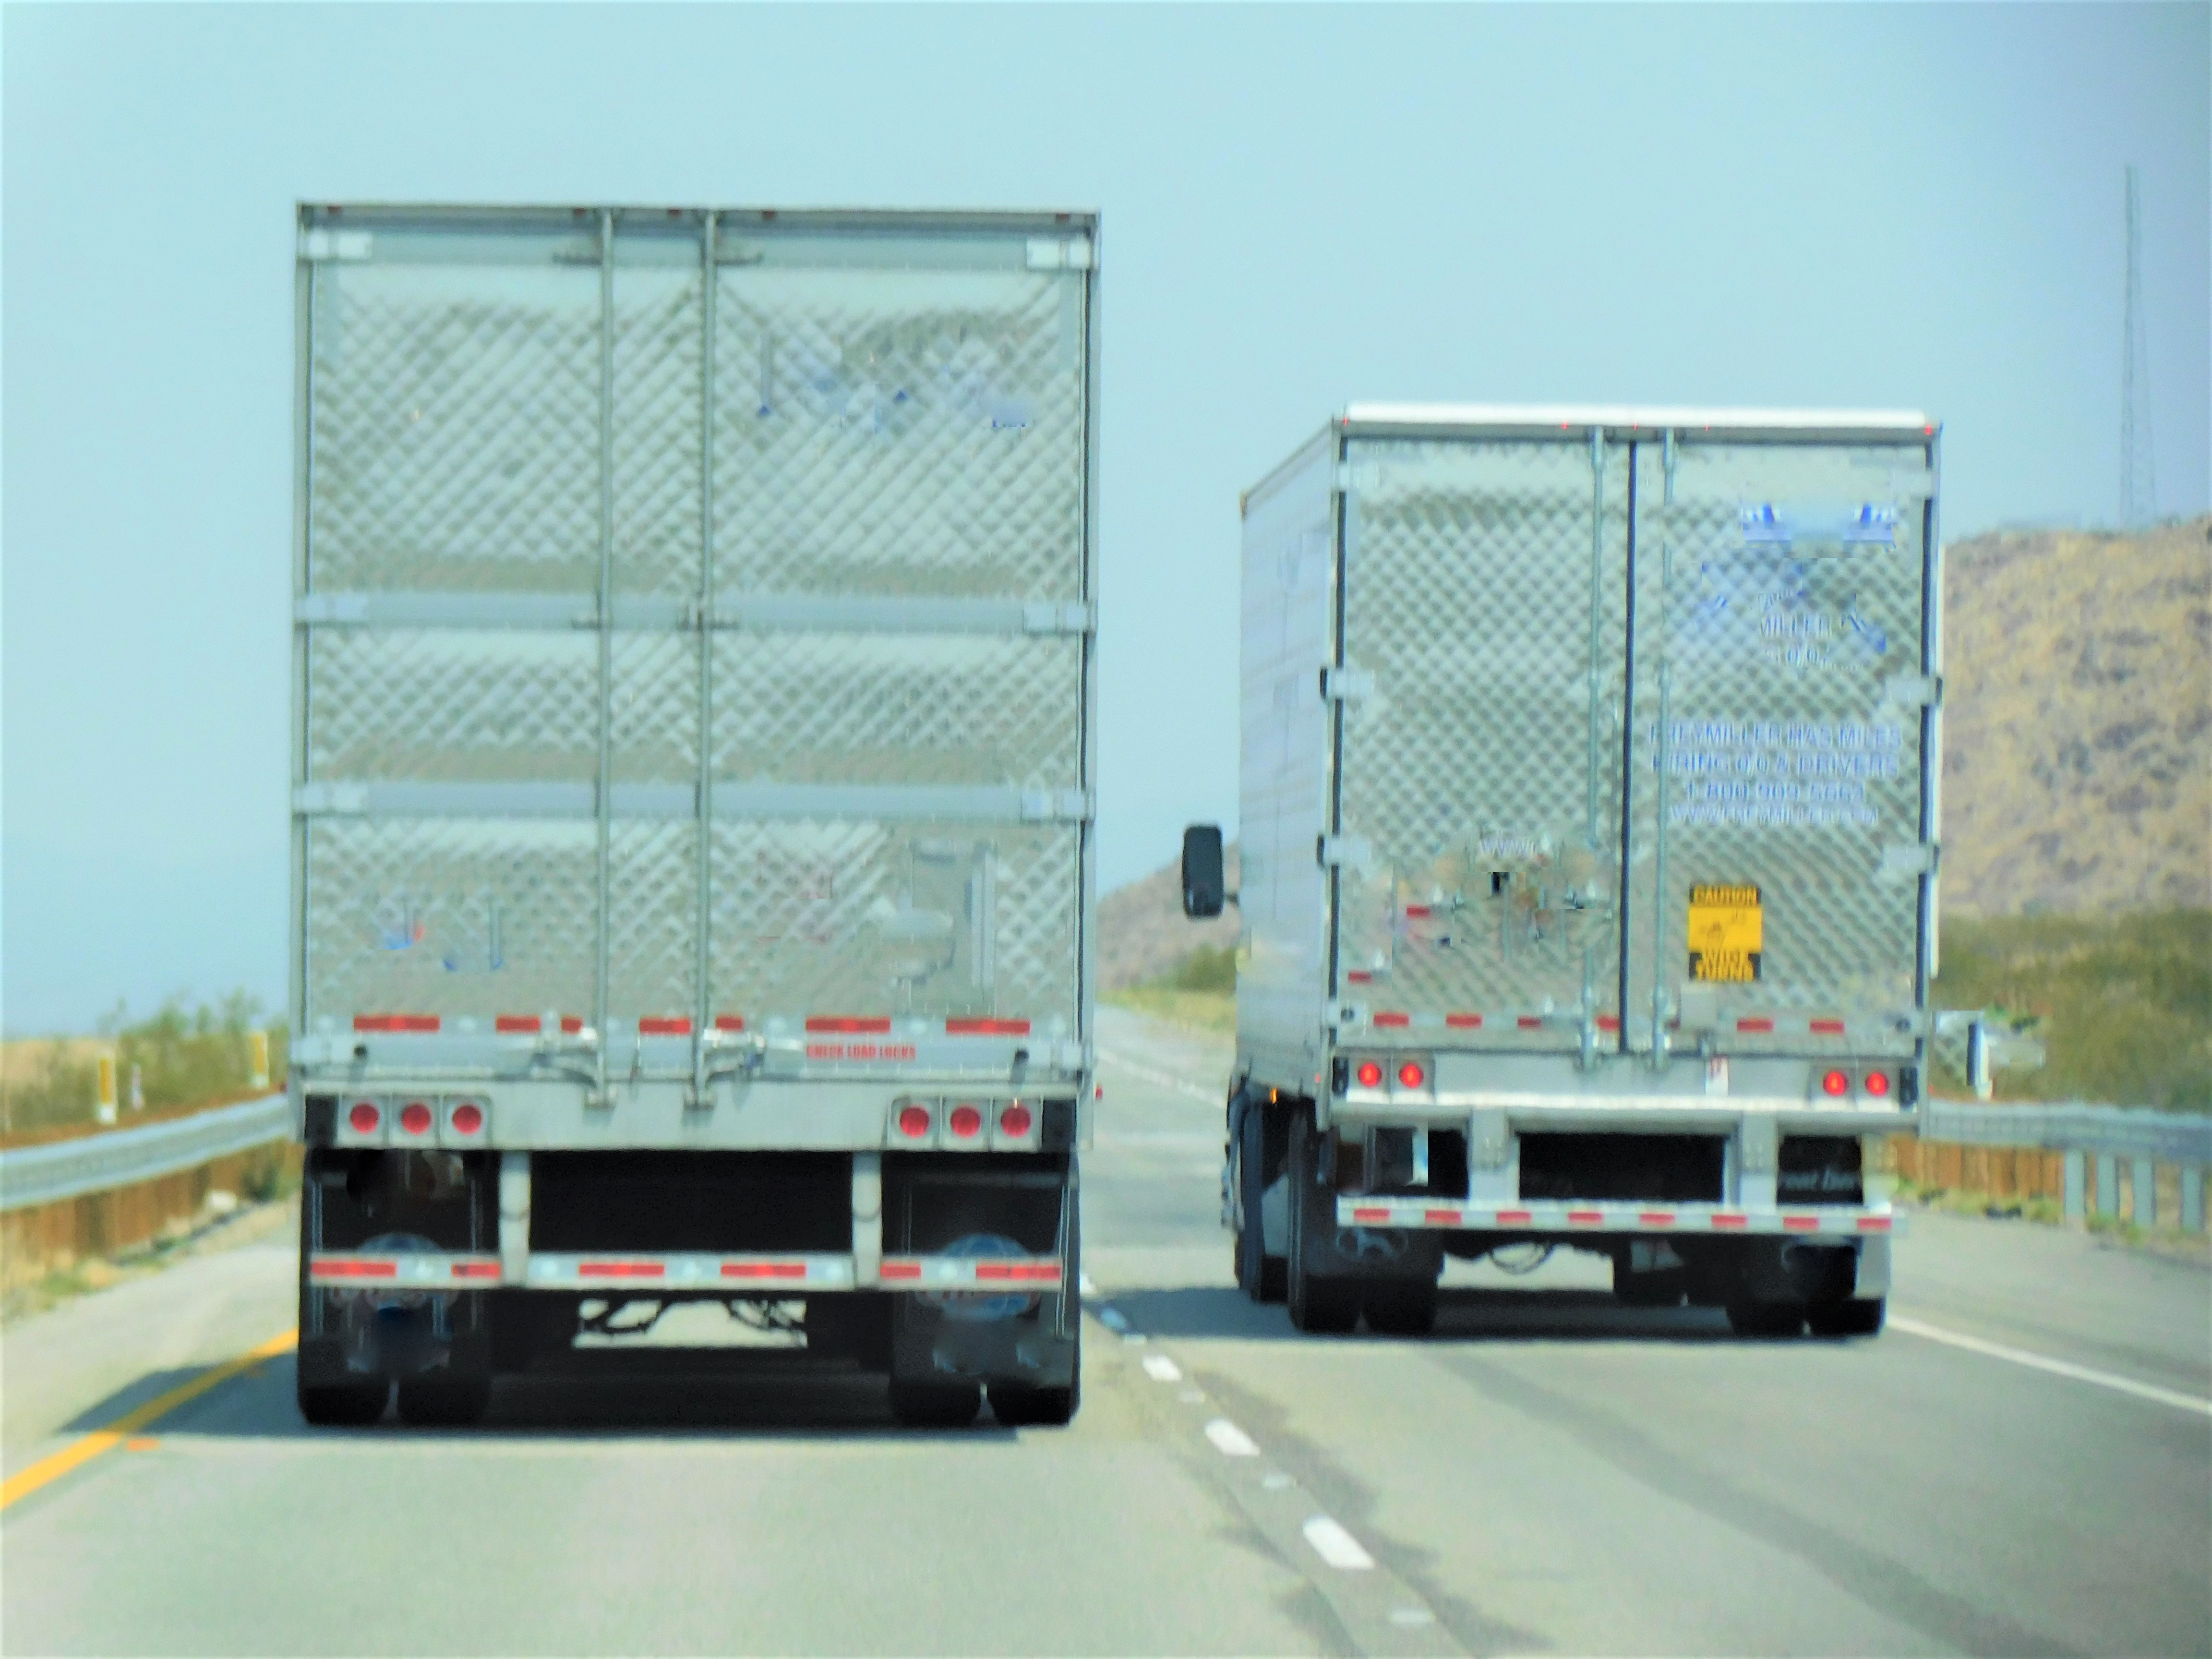 Less Than Truckload (LTL) Vs Full Truckload (FTL) Shipping: What's The Difference?